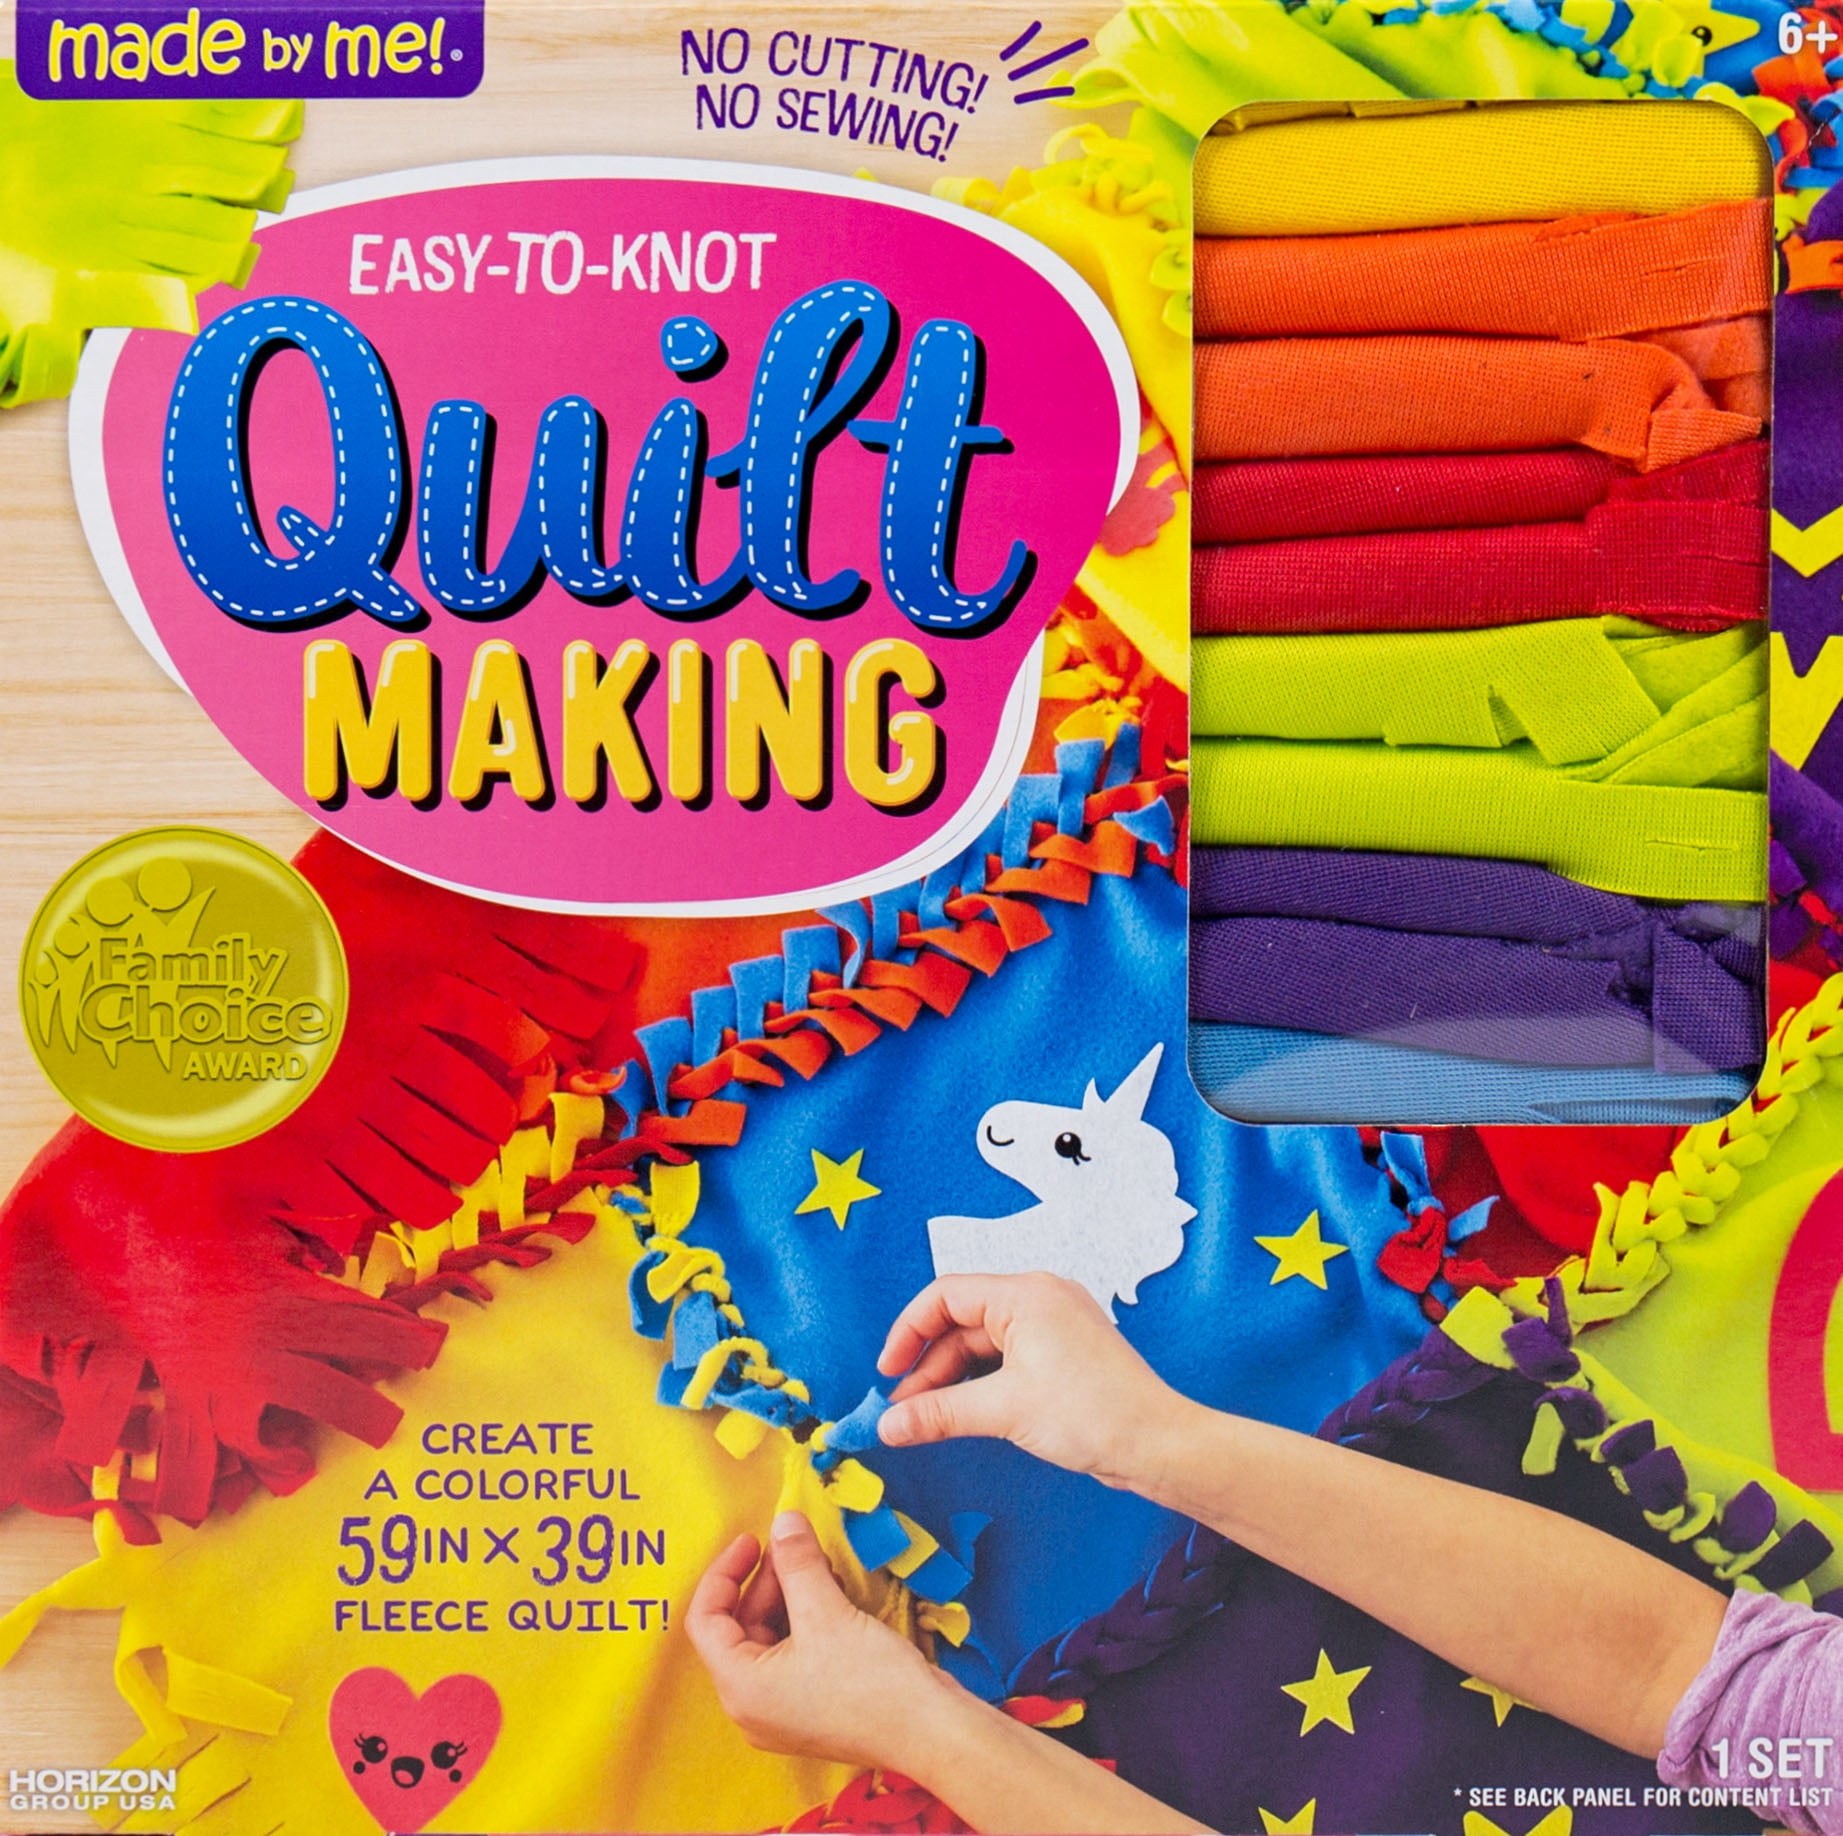 Home – Knitting, Sewing, Patchwork and Quilting tools